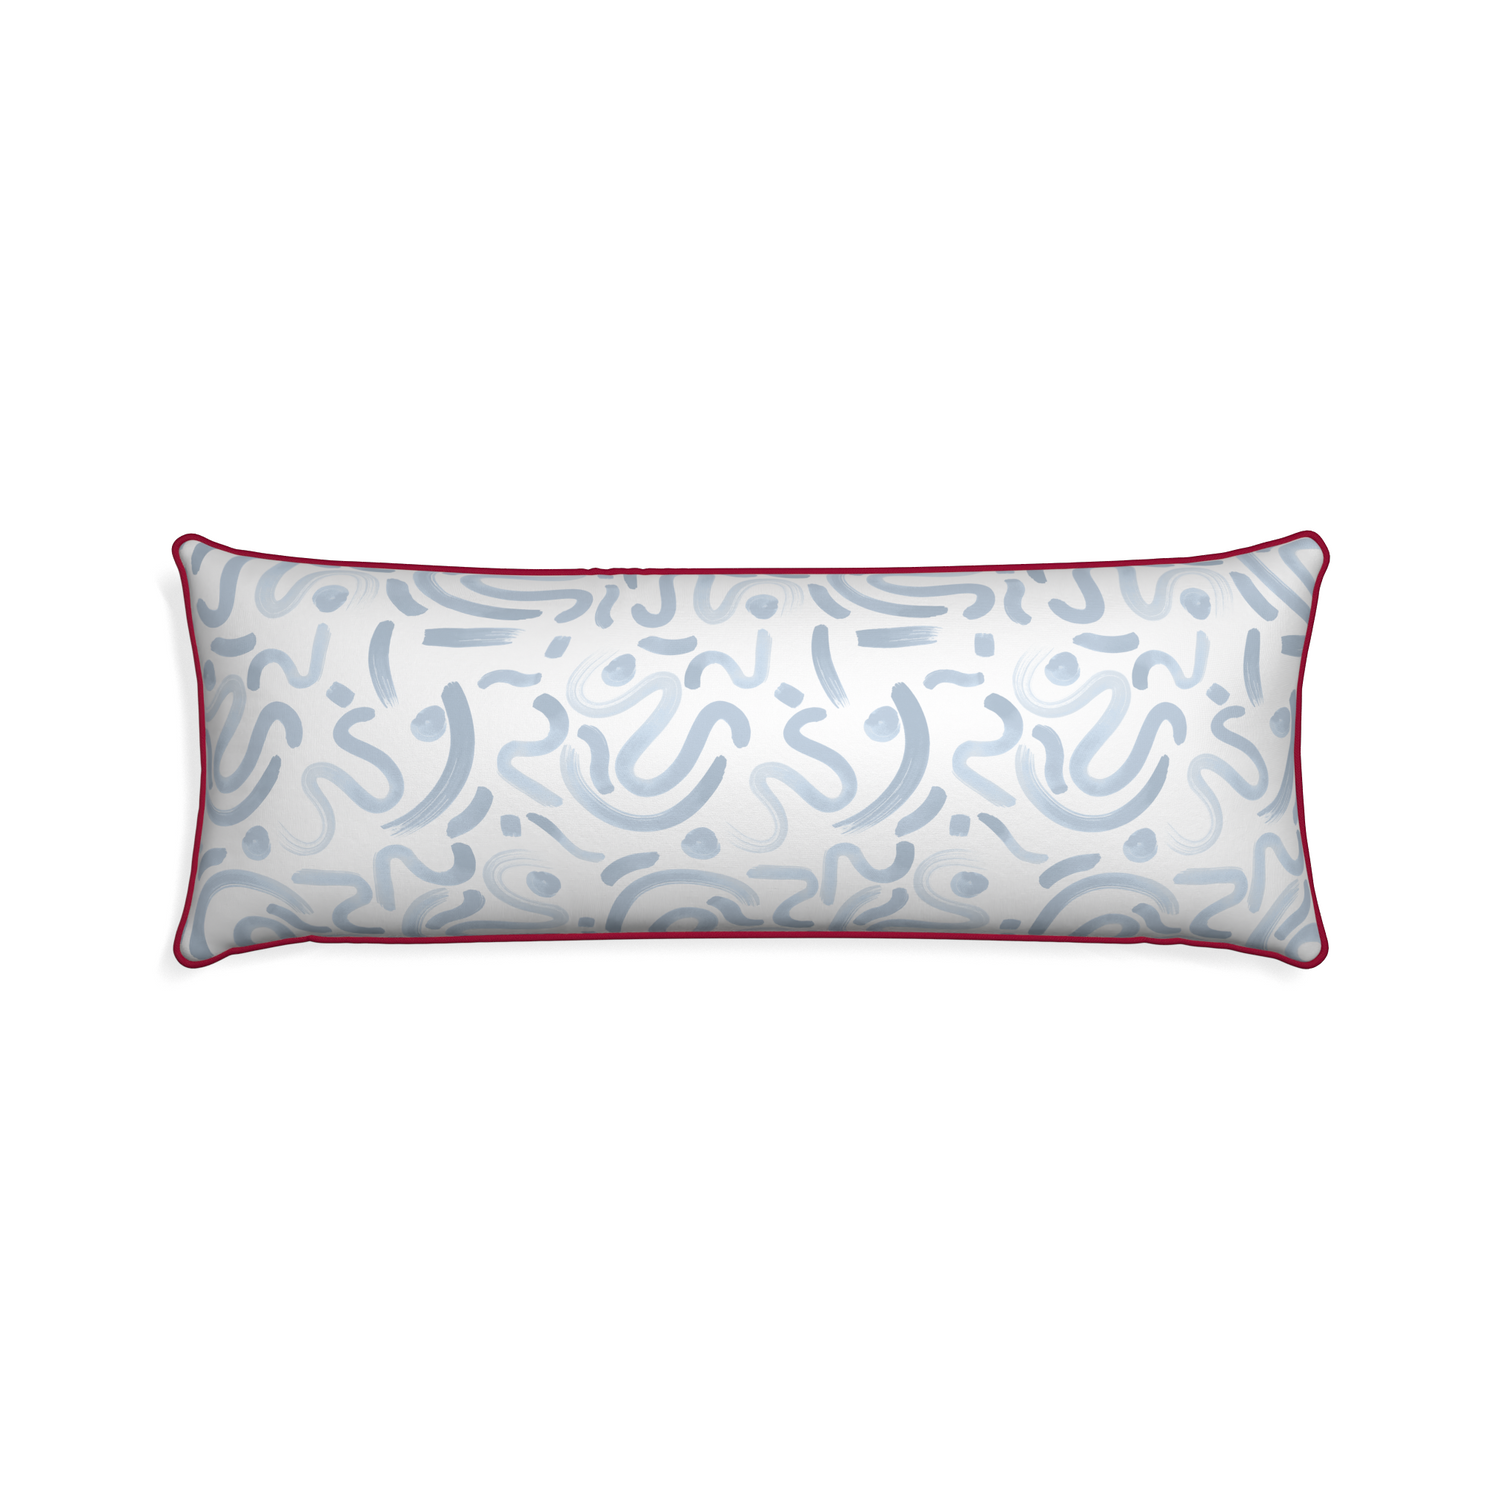 Xl-lumbar hockney sky custom pillow with raspberry piping on white background